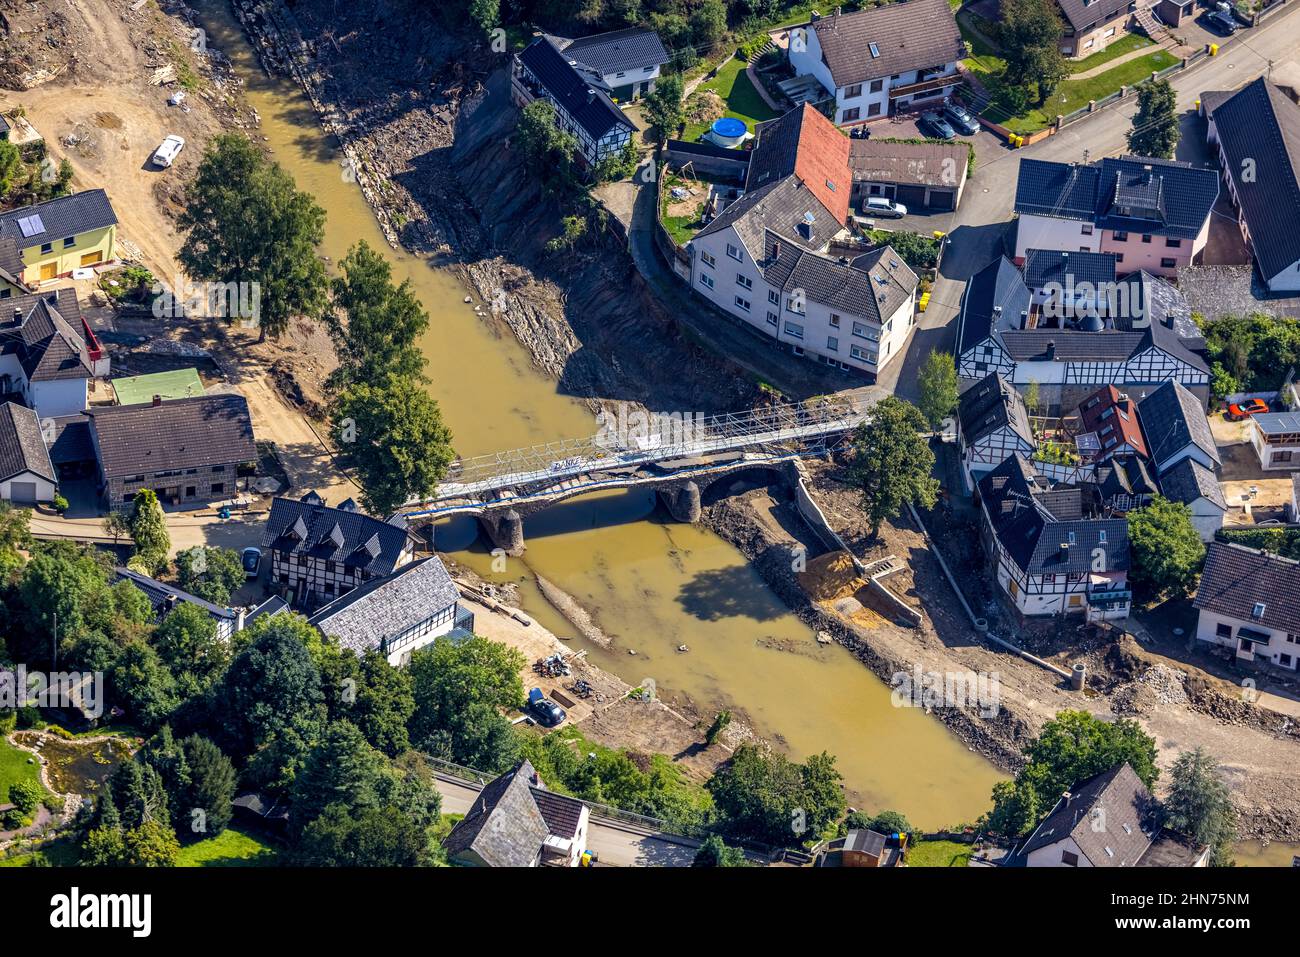 Aerial photograph, flooded area with river Ahr and bridge damage Domhofstraße in Schuld, Ahr flood, Ahr valley, Rhineland-Palatinate, Germany, Ahr flo Stock Photo